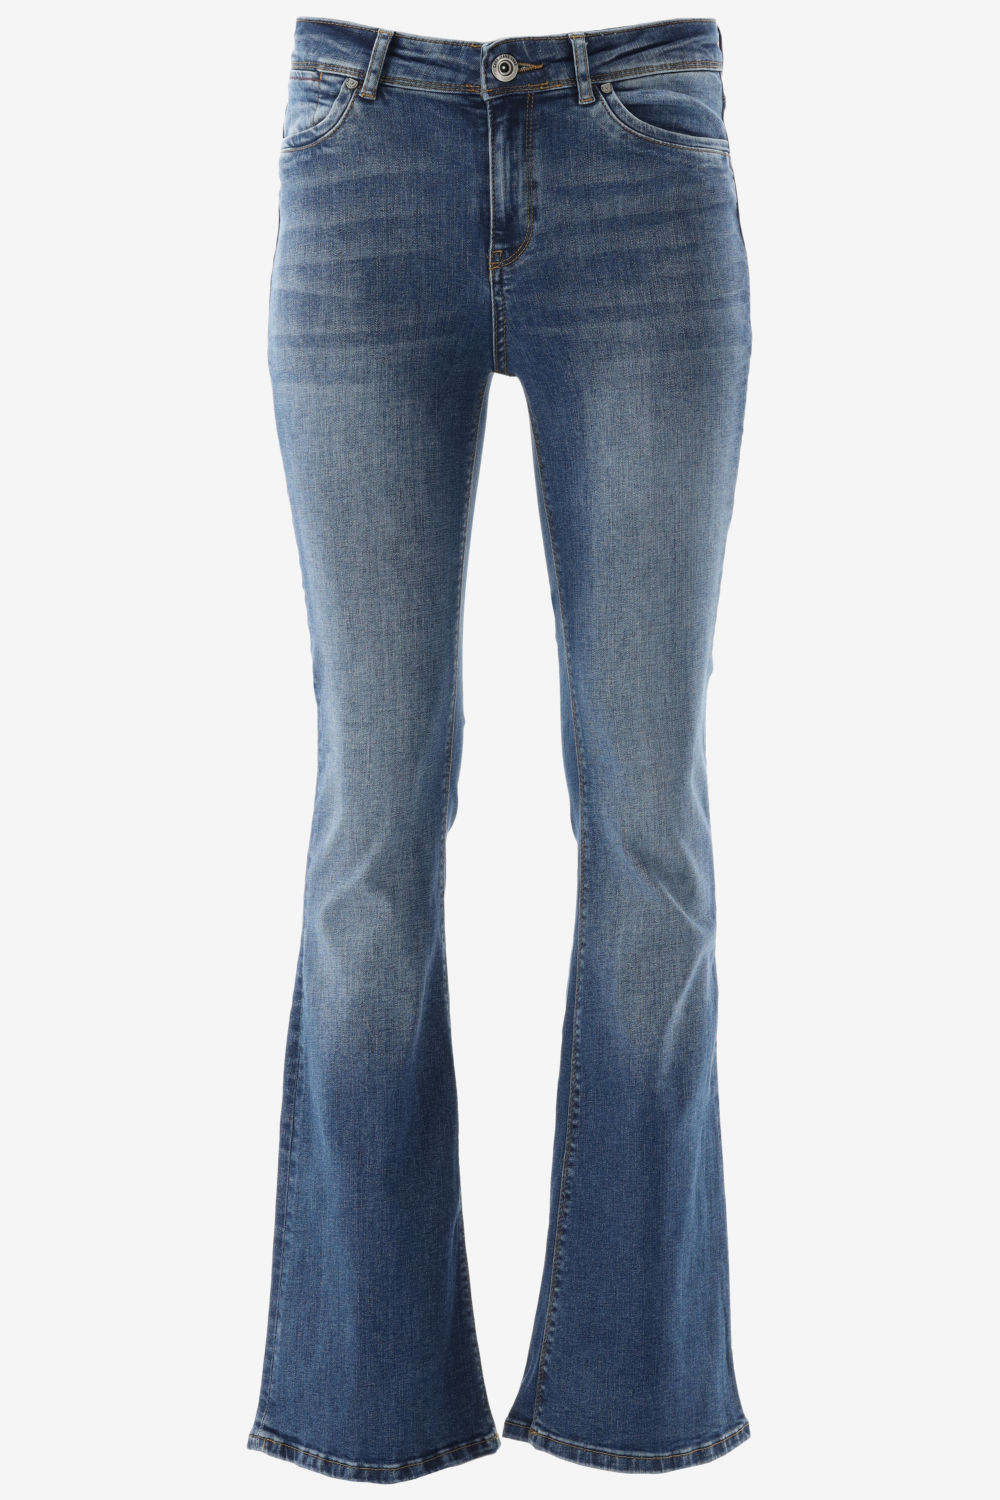 Cars Jeans Michelle Flare Den 78627 Stone Used Dames Maat - W28 X L30